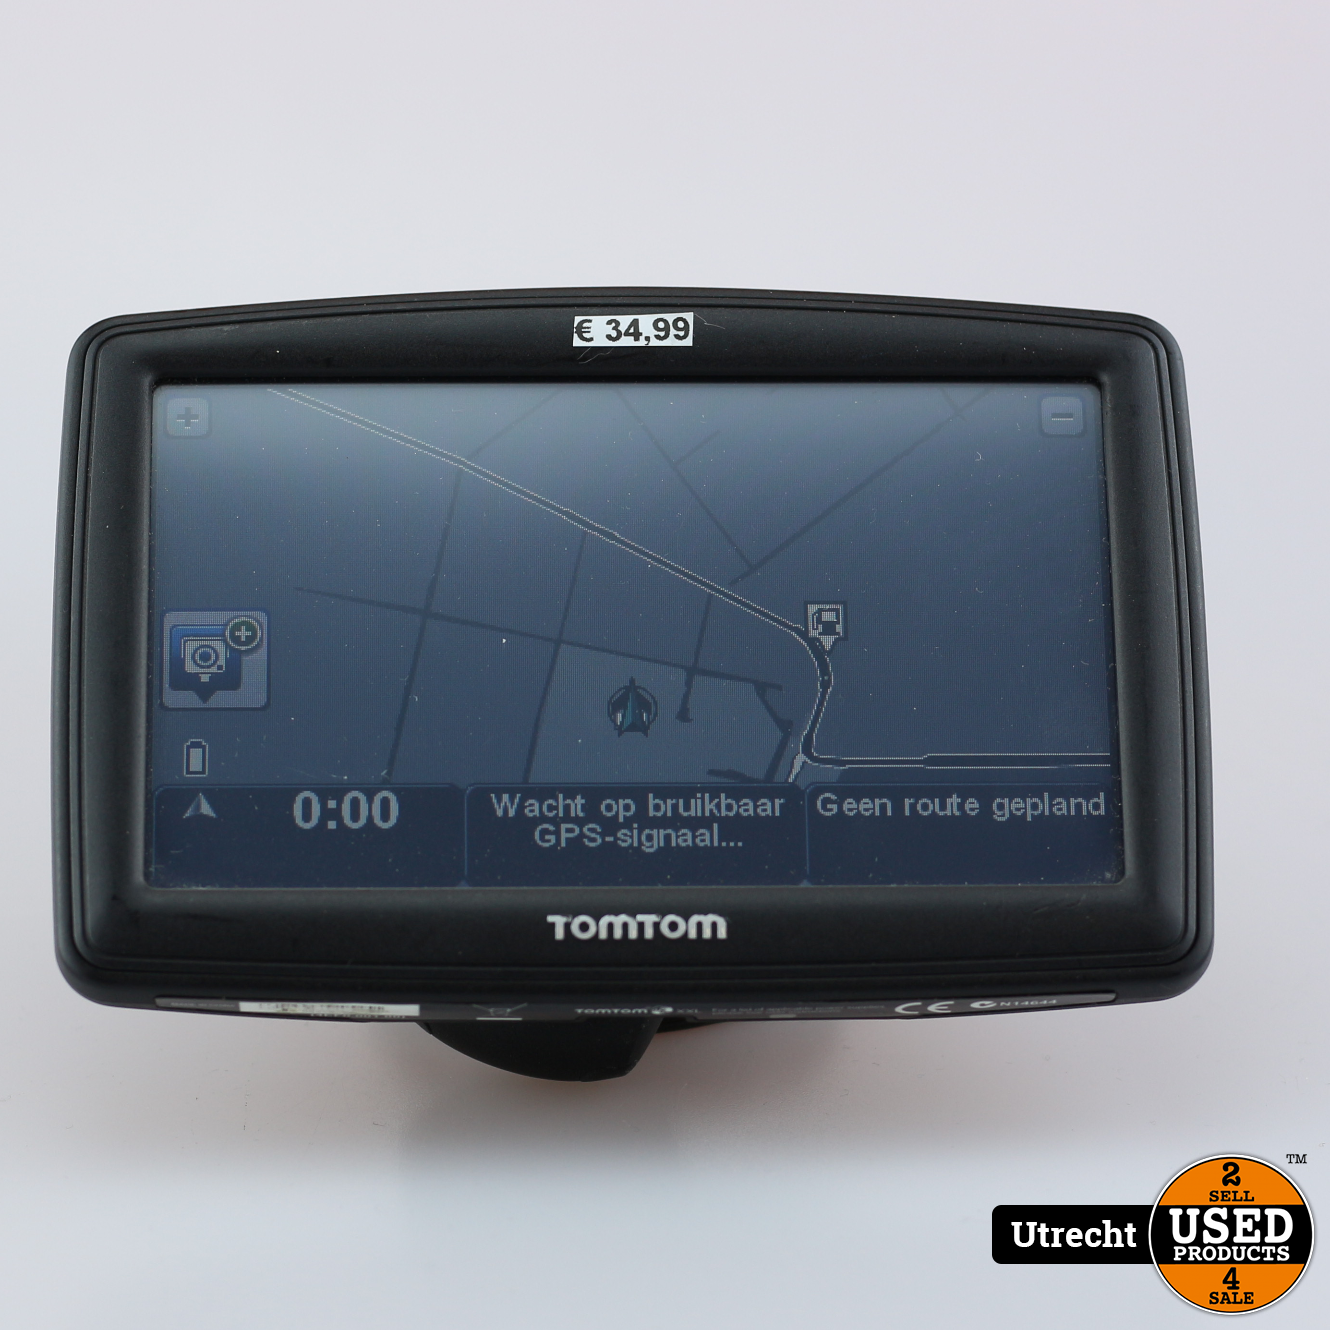 feit Paragraaf Ruwe olie TomTom XXL Classic West Europa - Used Products Utrecht Noord